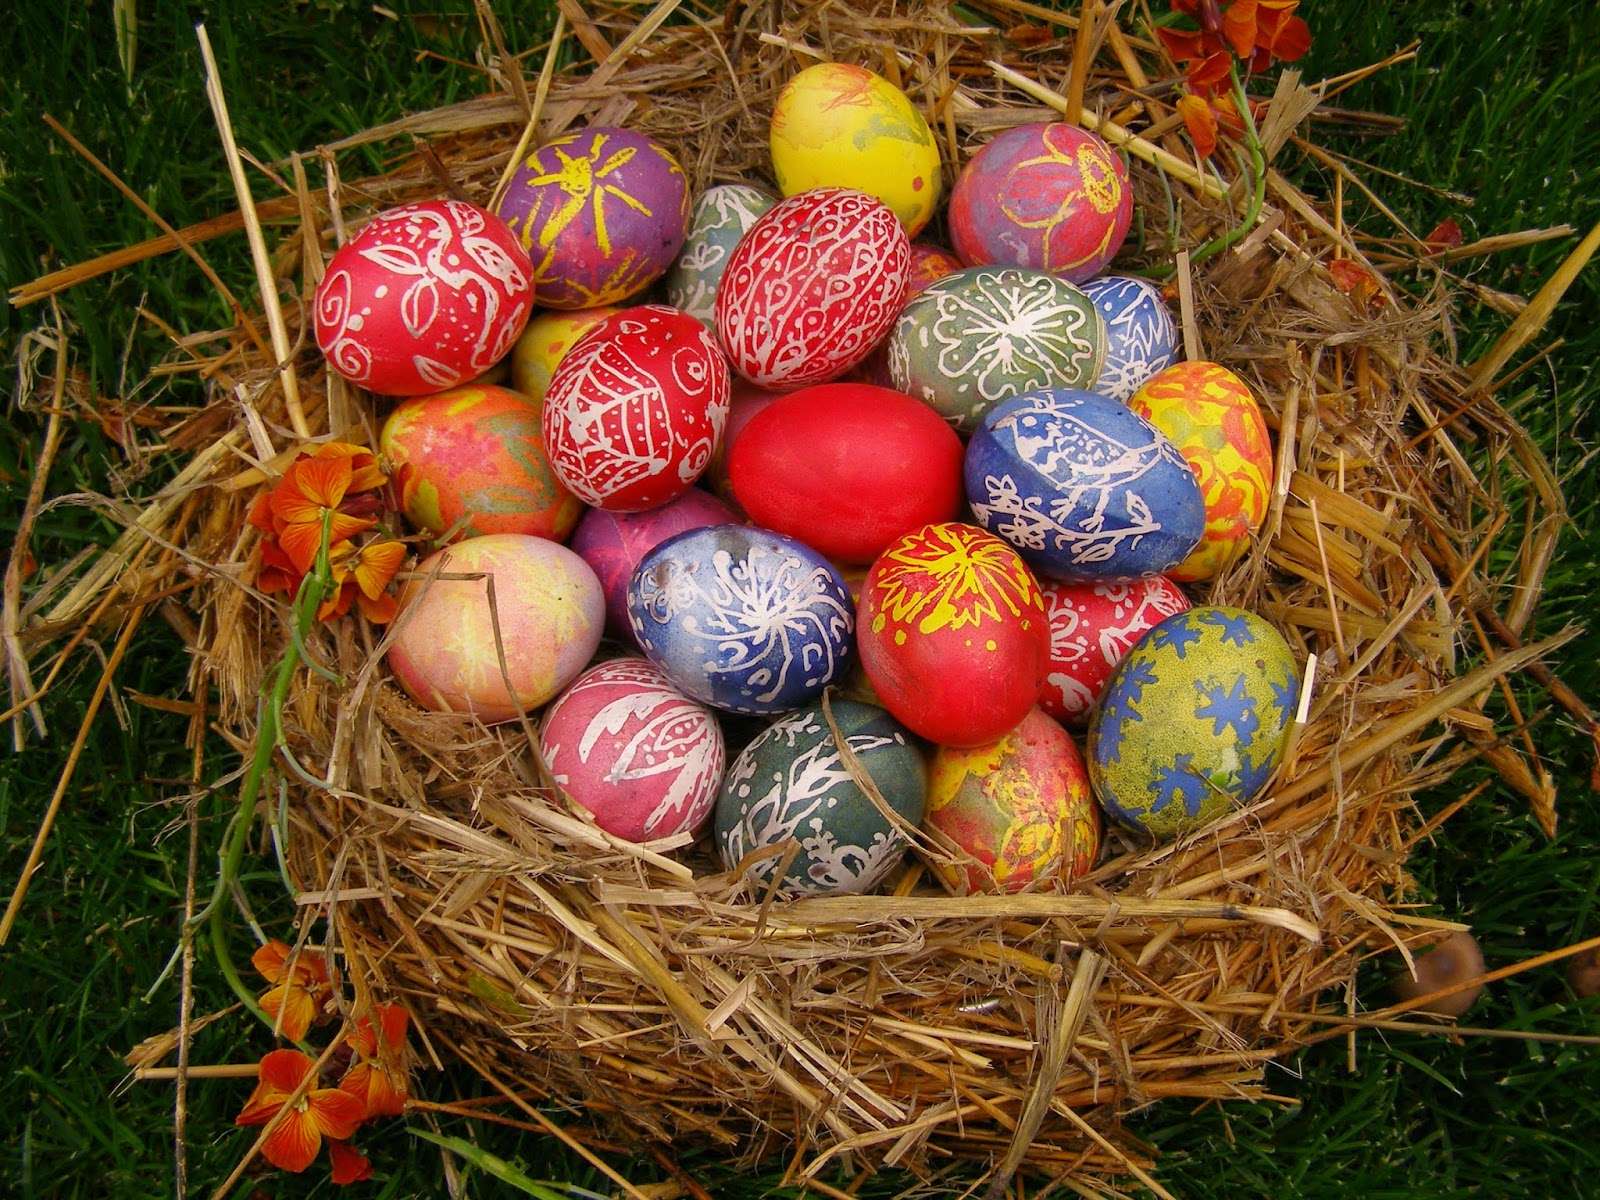 Colorful Easter eggs online puzzle